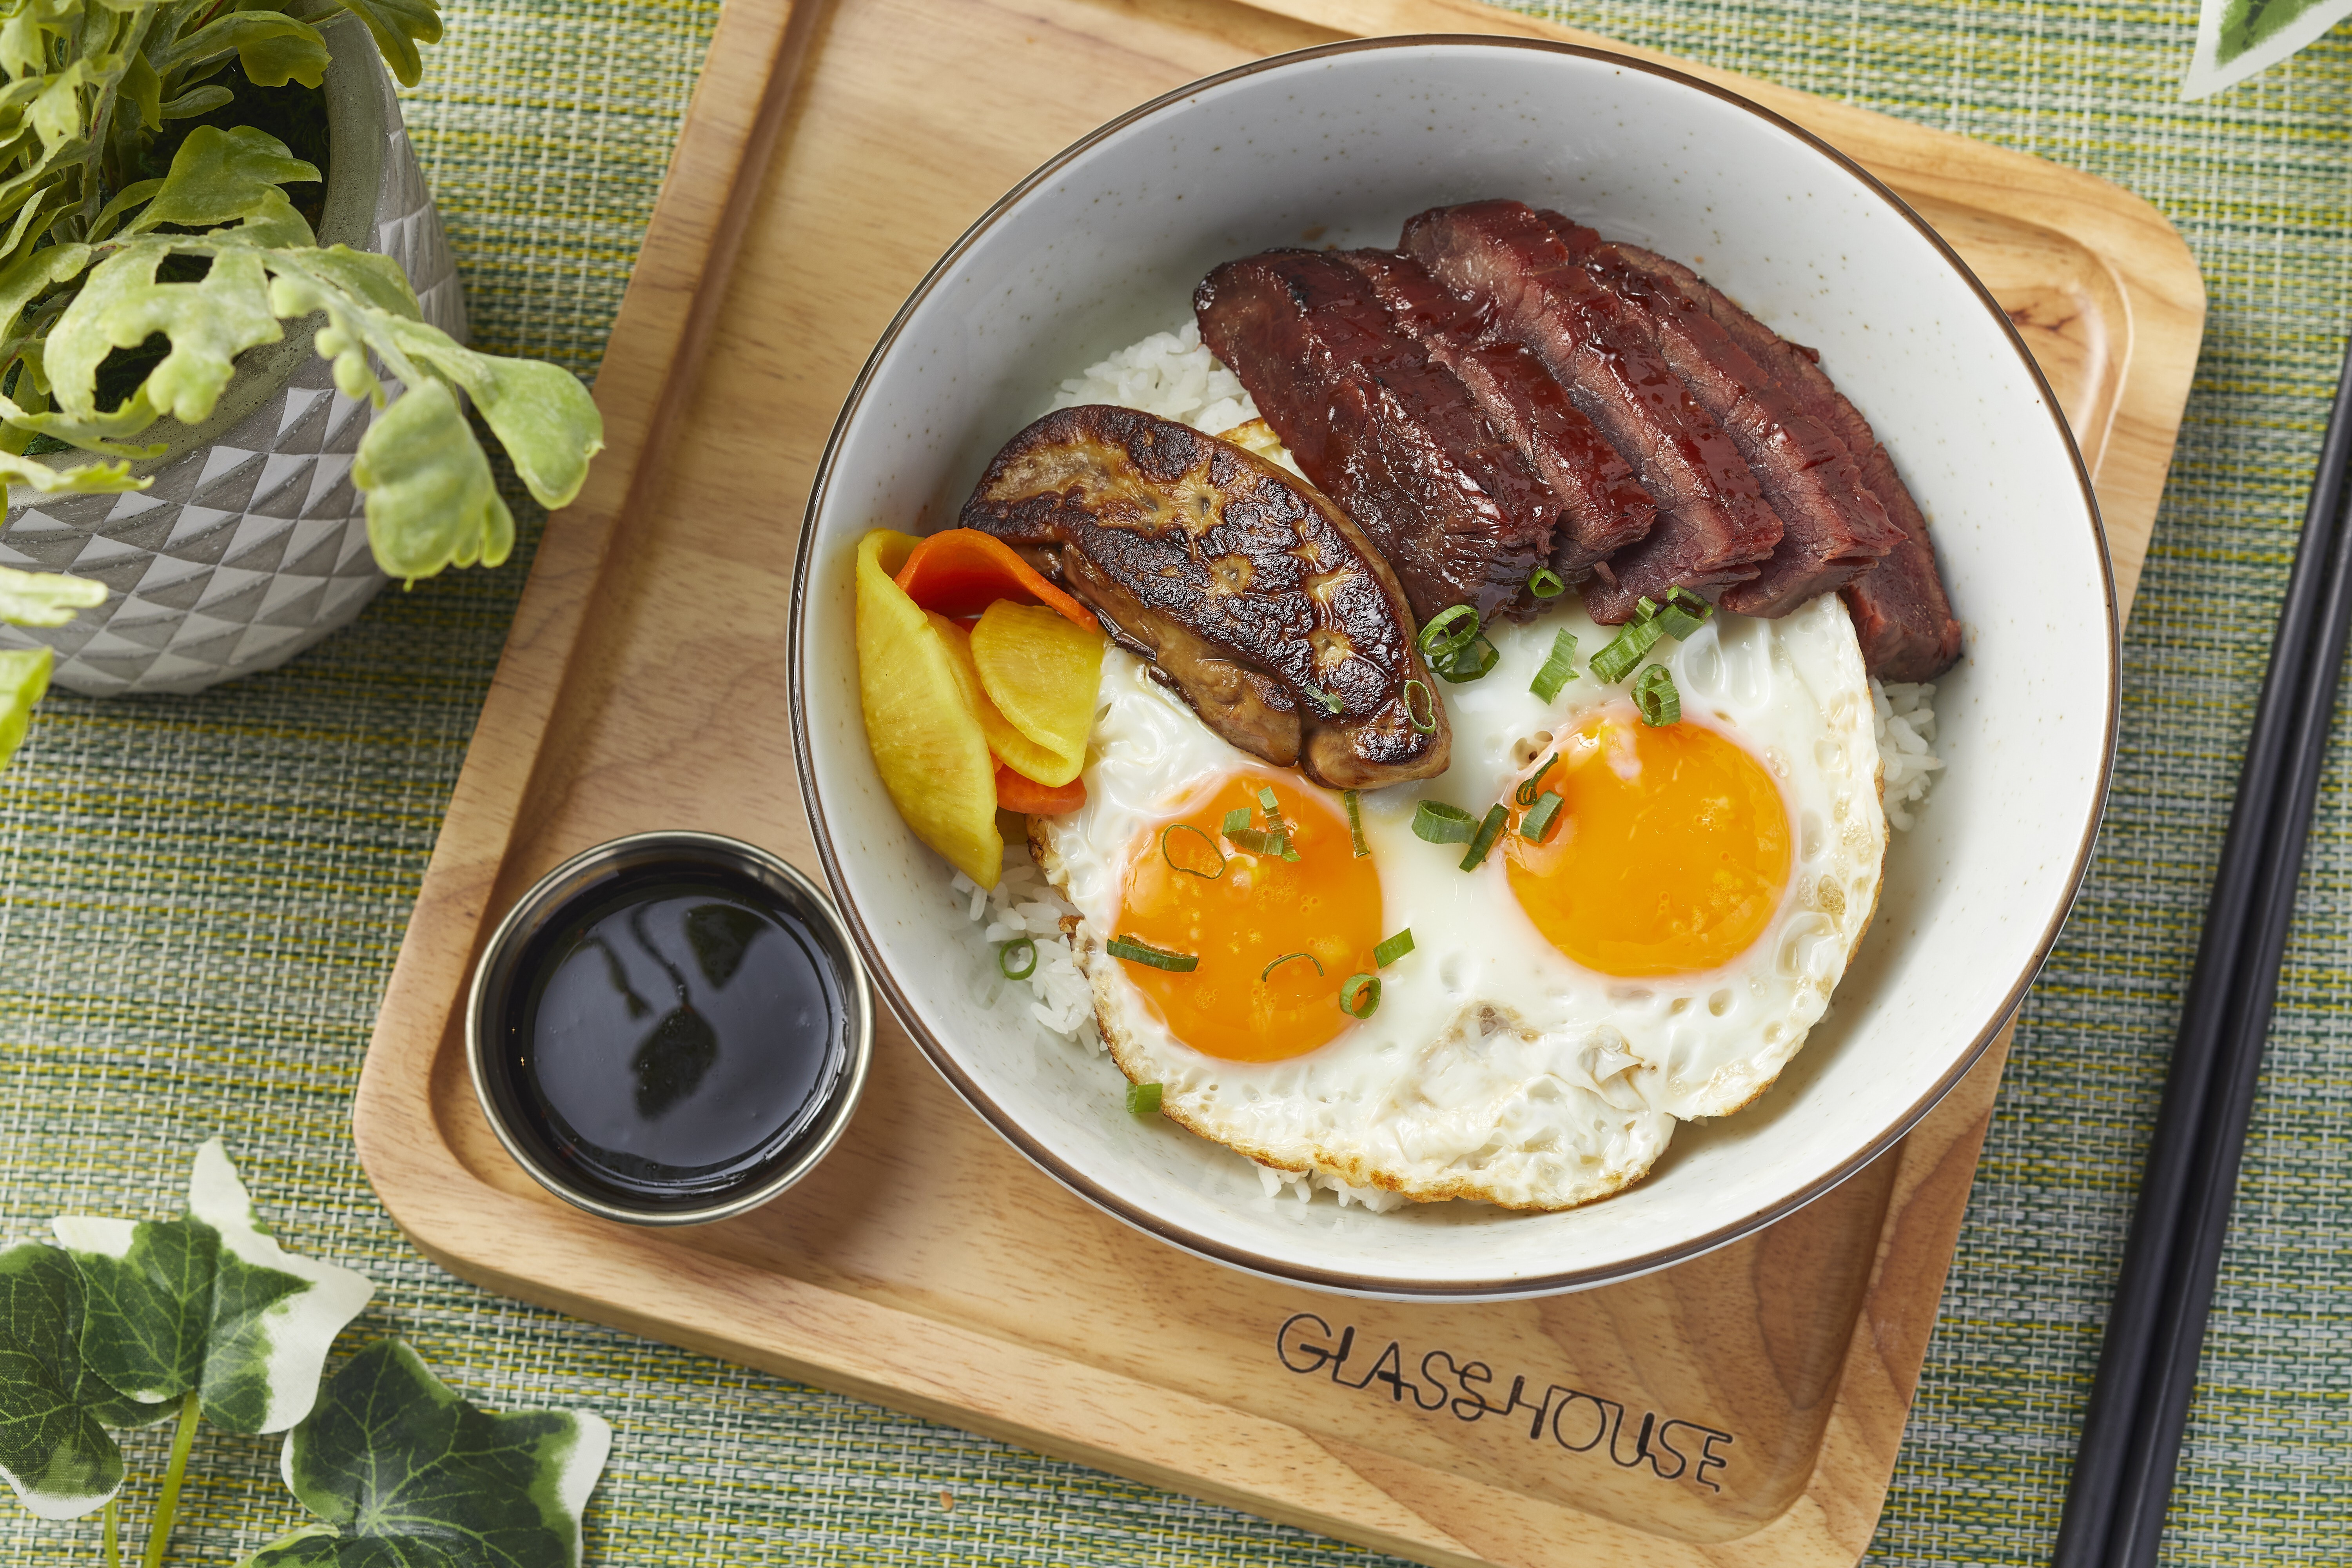 Wagyu char siu and foie gras rice served with fried eggs at Glasshouse Greenery. Photo: handout